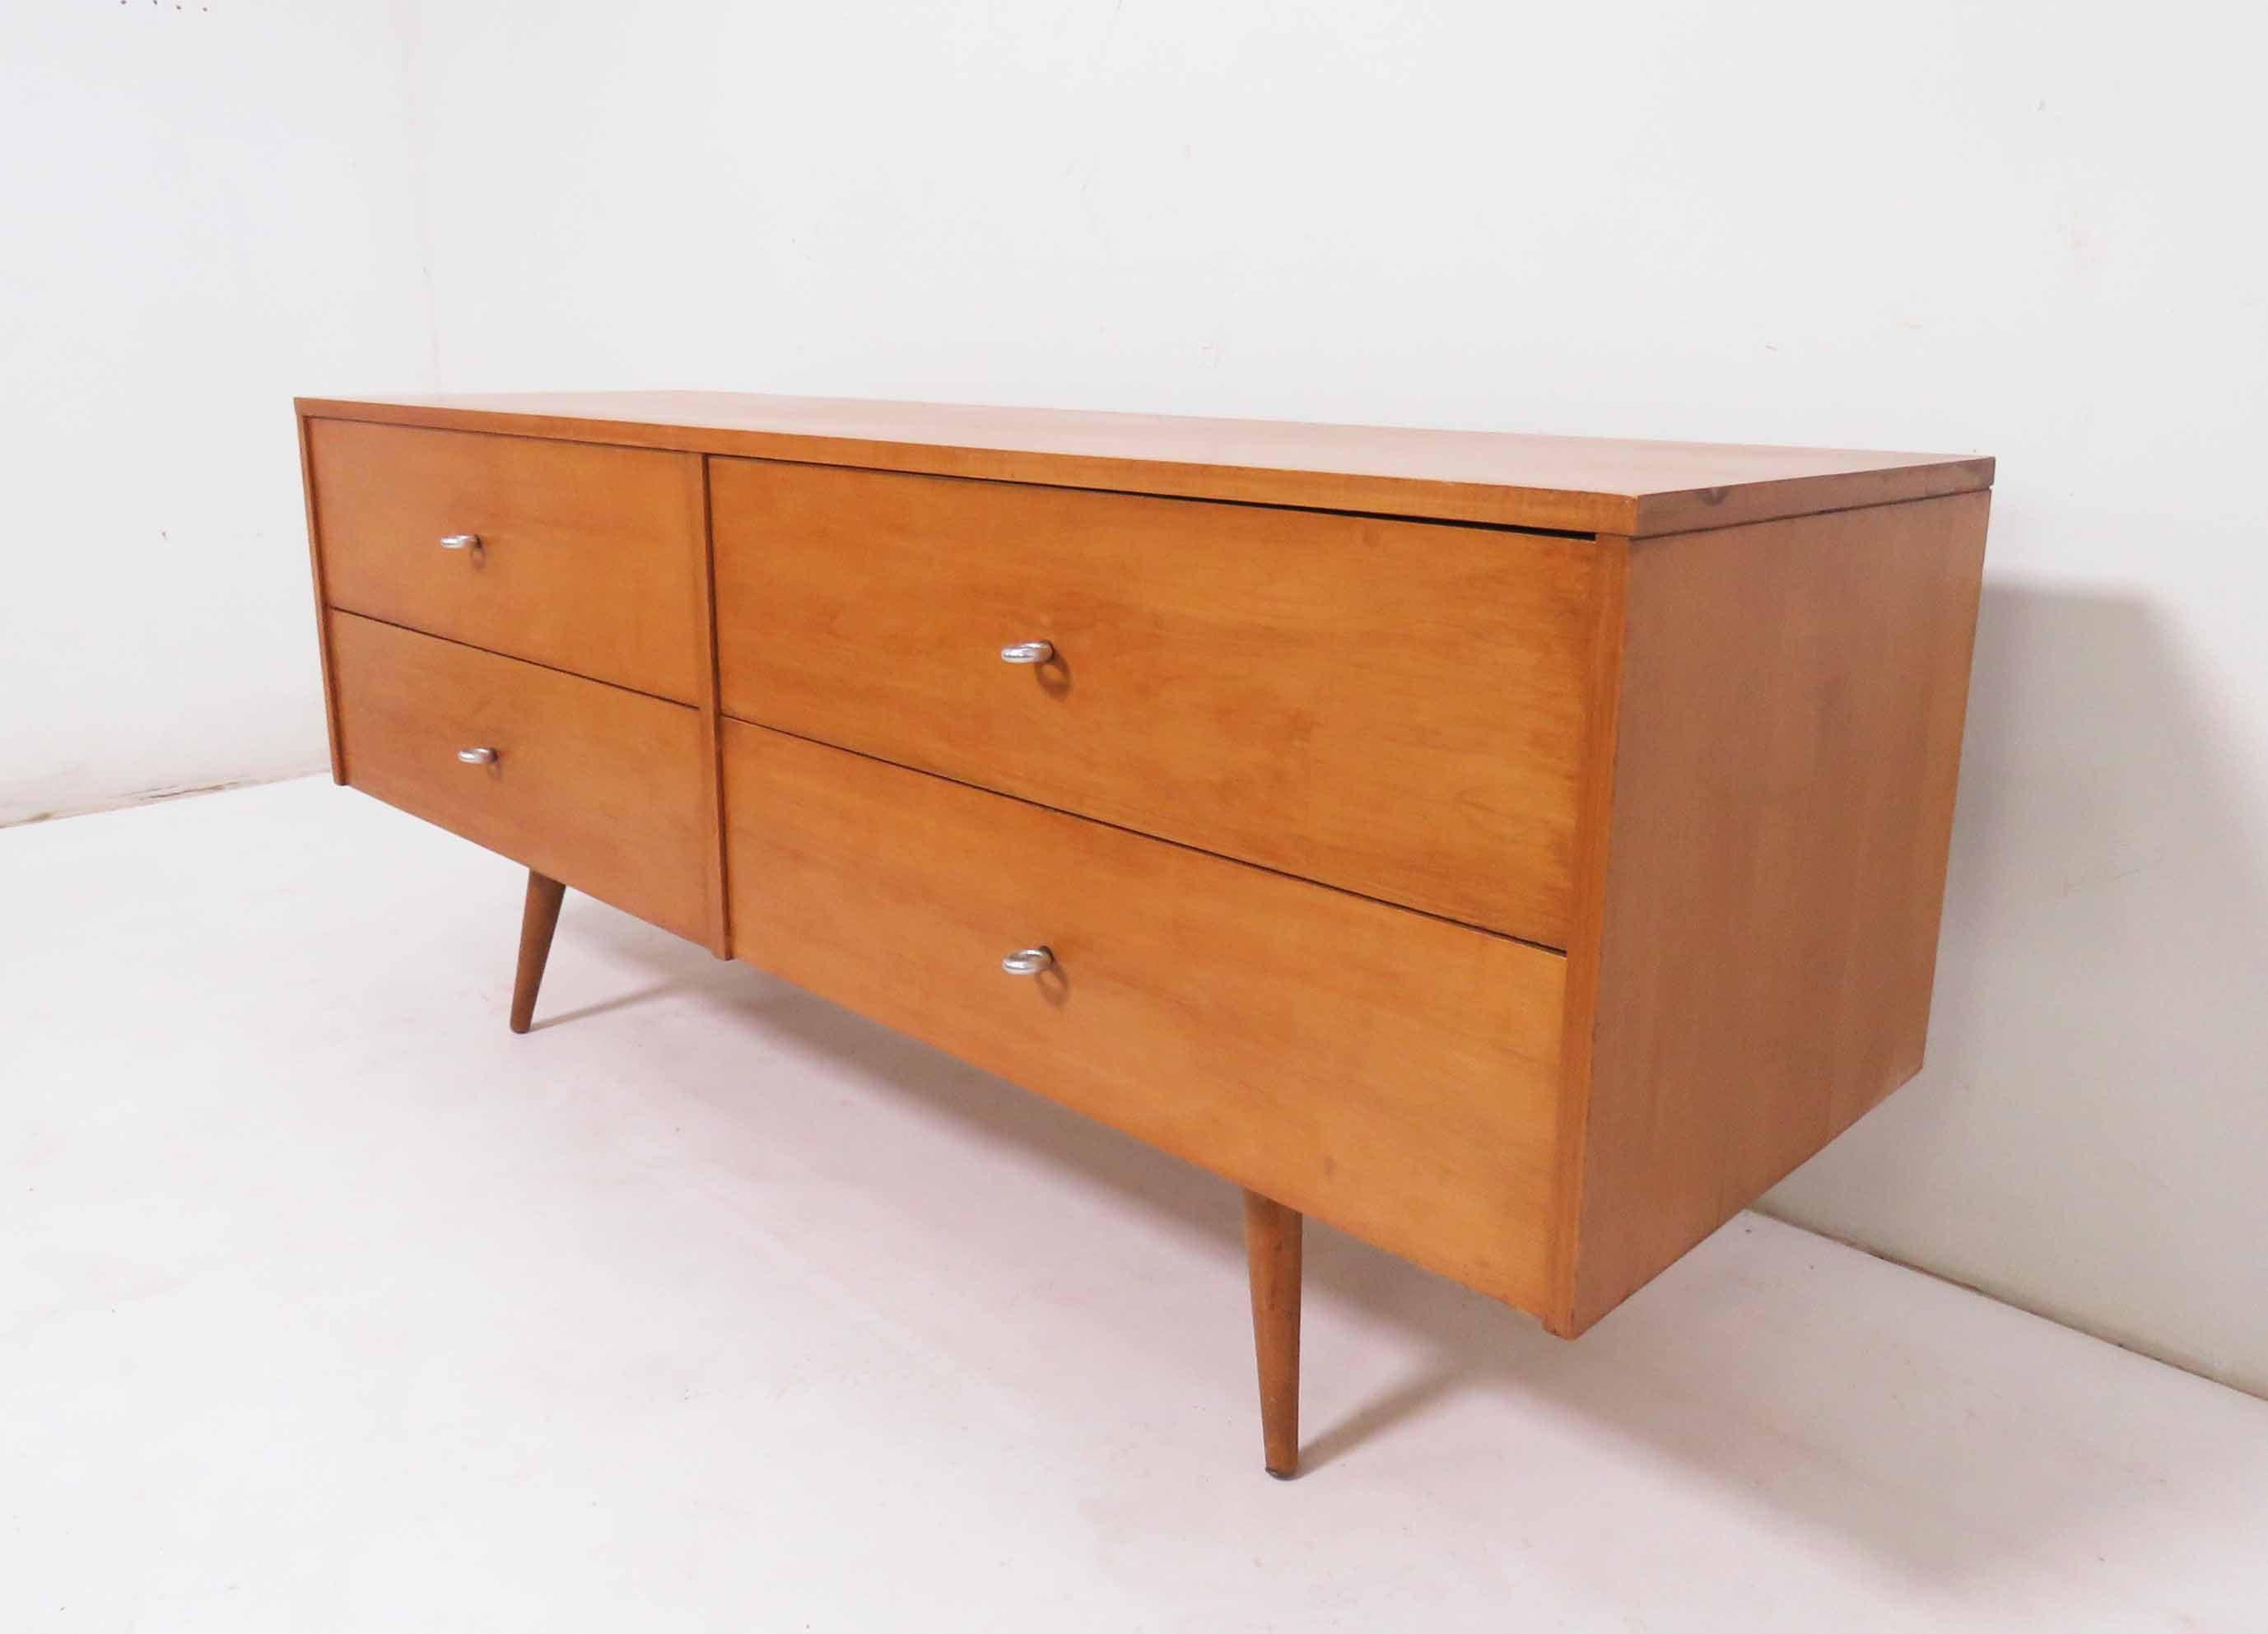 Mid-Century Modern chest of drawers in natural maple finish designed by Paul McCobb for Planner Group, Winchendon Furniture Co., circa 1950s. At just under 26